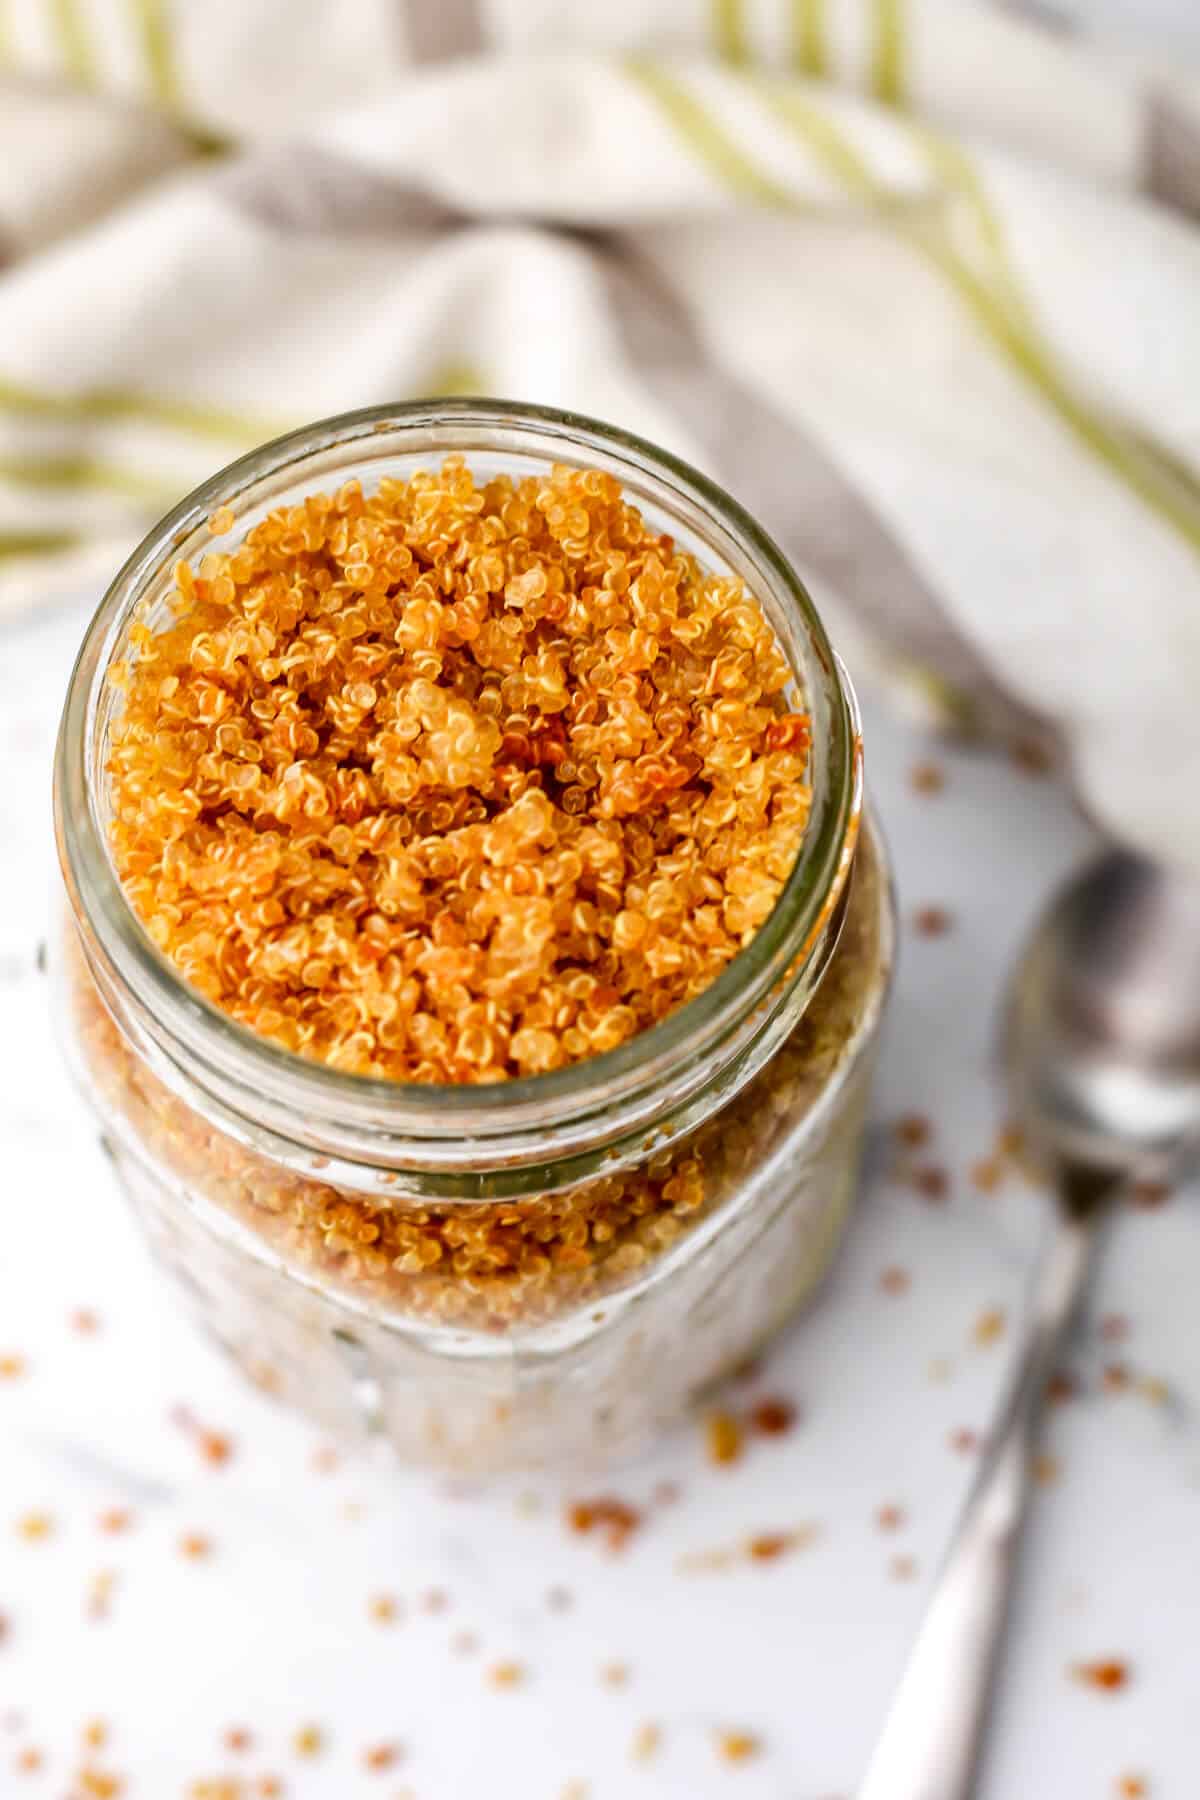 A top view of a jar filled with crunchy quinoa with a spoon on the side and a tea towel behind it.